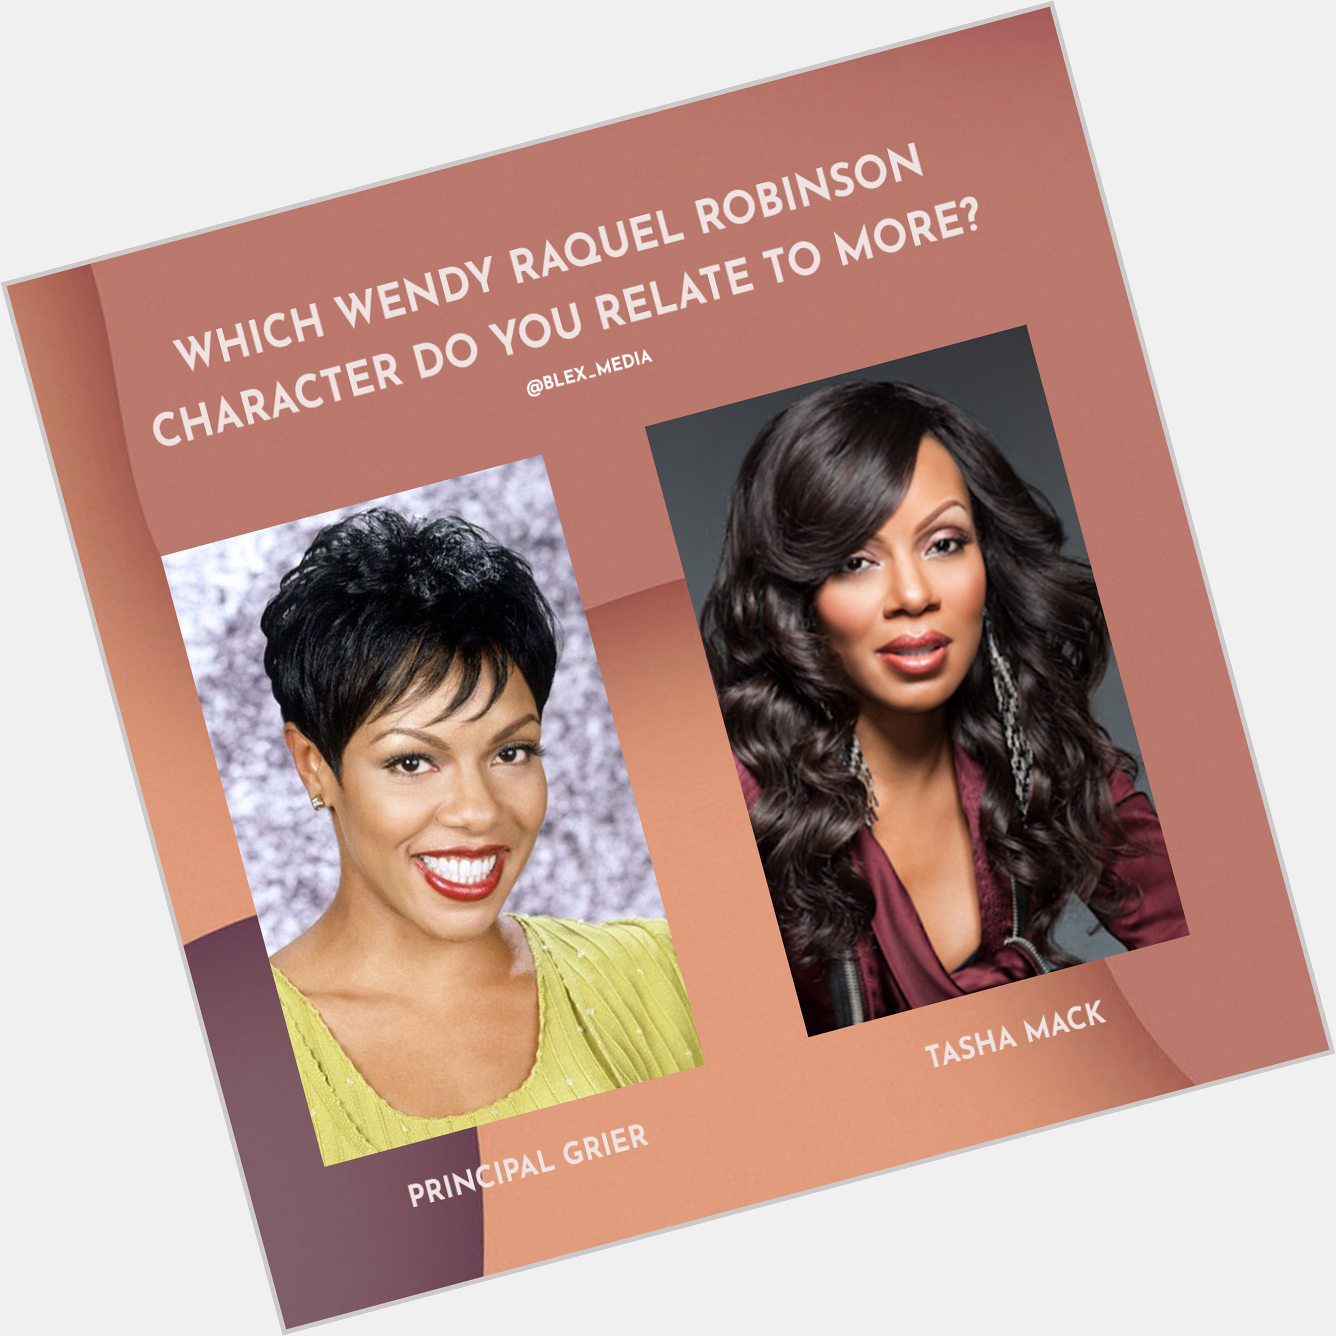 Happy Birthday, Wendy Raquel Robinson! Of her two iconic roles, which character do you relate to more? 